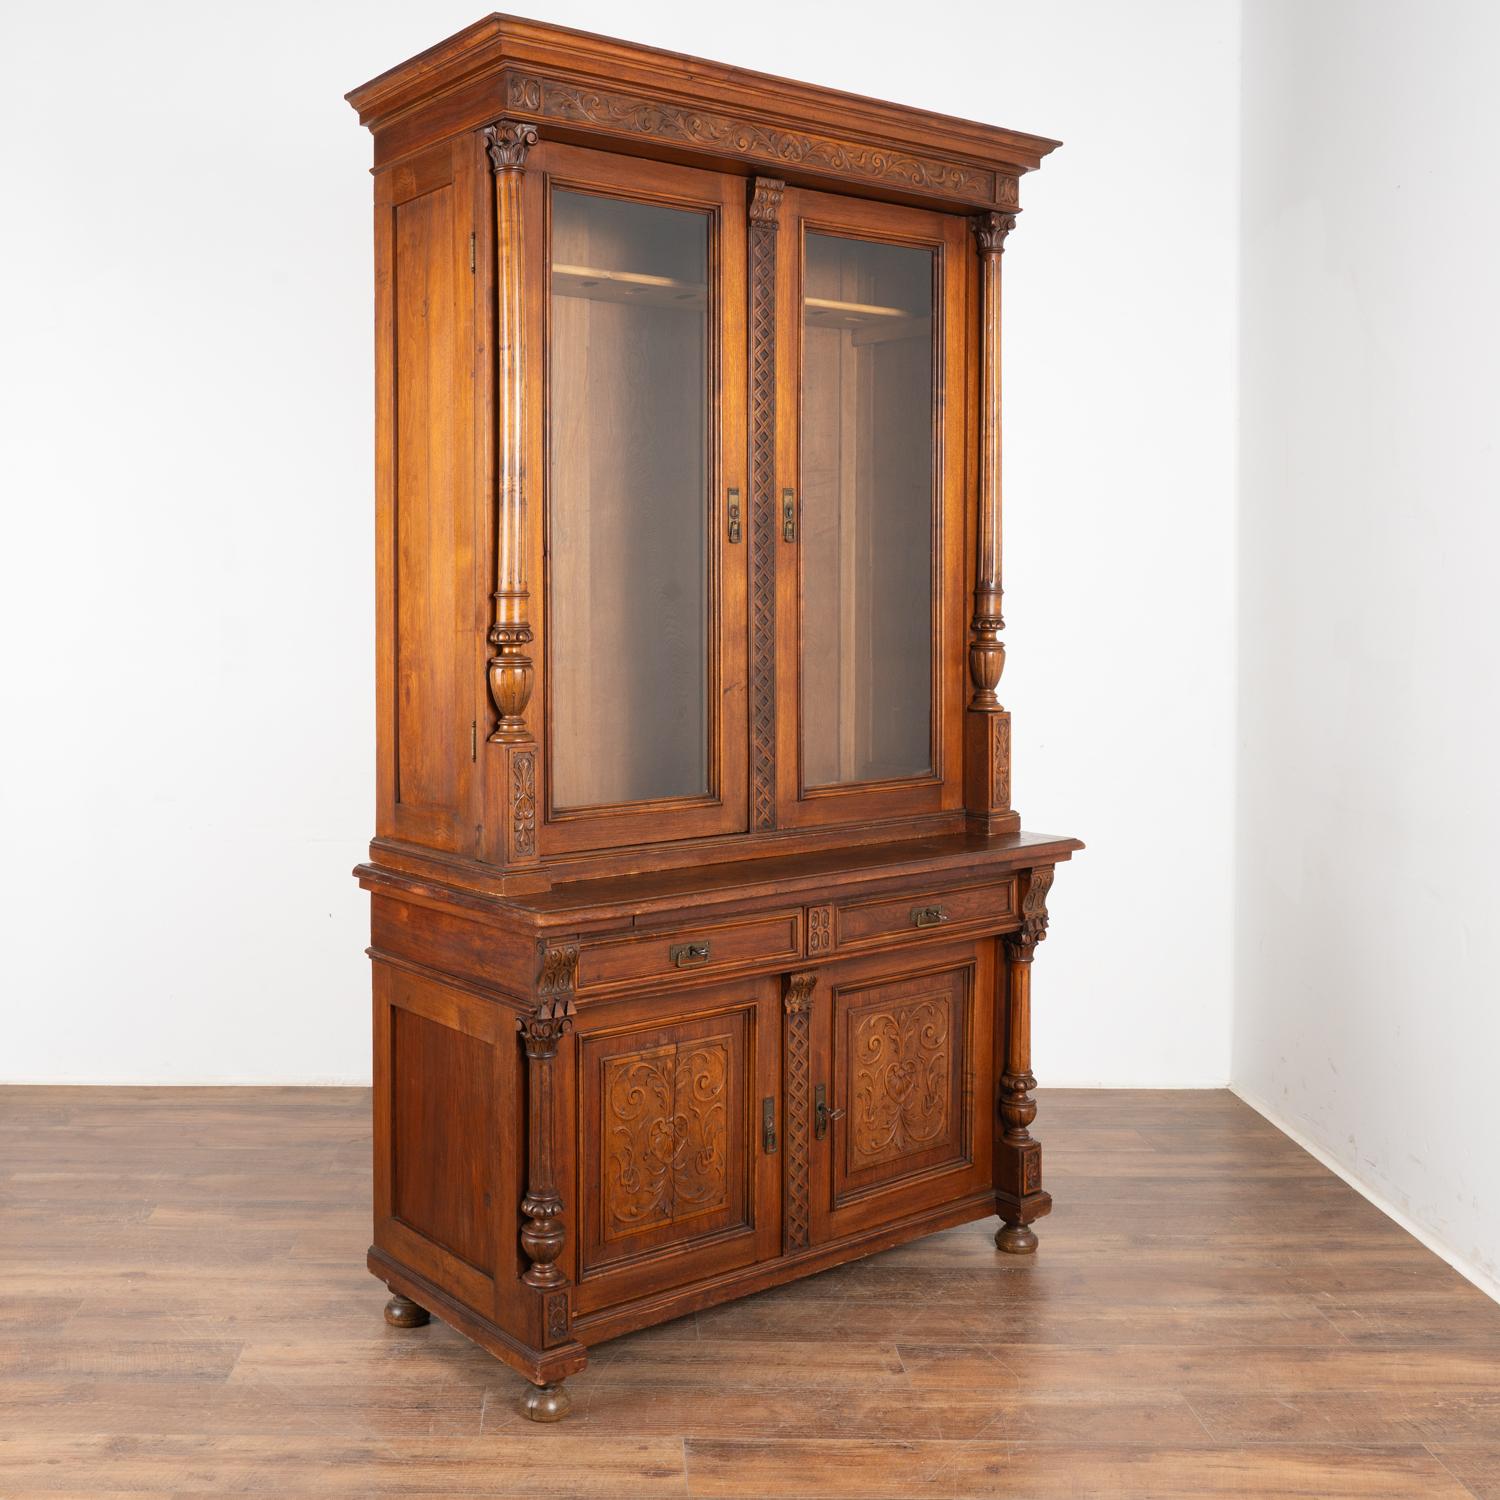 Striking walnut gun cabinet with attractive carving and turned columns. Holds 9 guns and stands over 8' tall.
Lower cabinet has two drawers over two doors with interior shelf.
Locks currently function with 2 keys included.
Built in two sections for